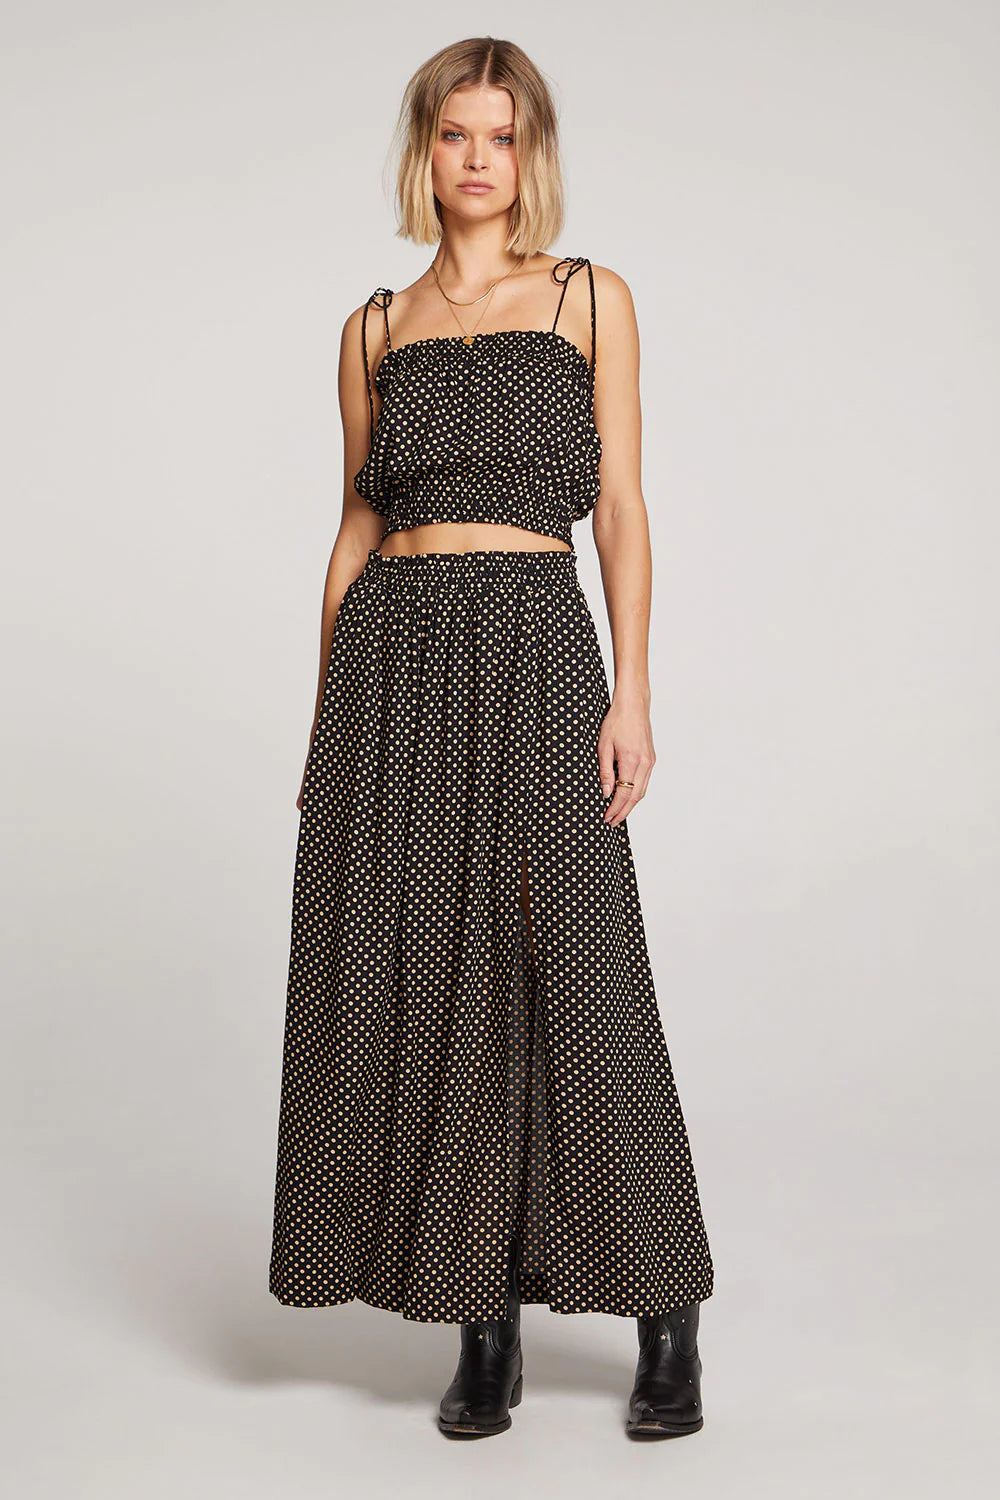 Delvie Skirt by Saltwater Luxe